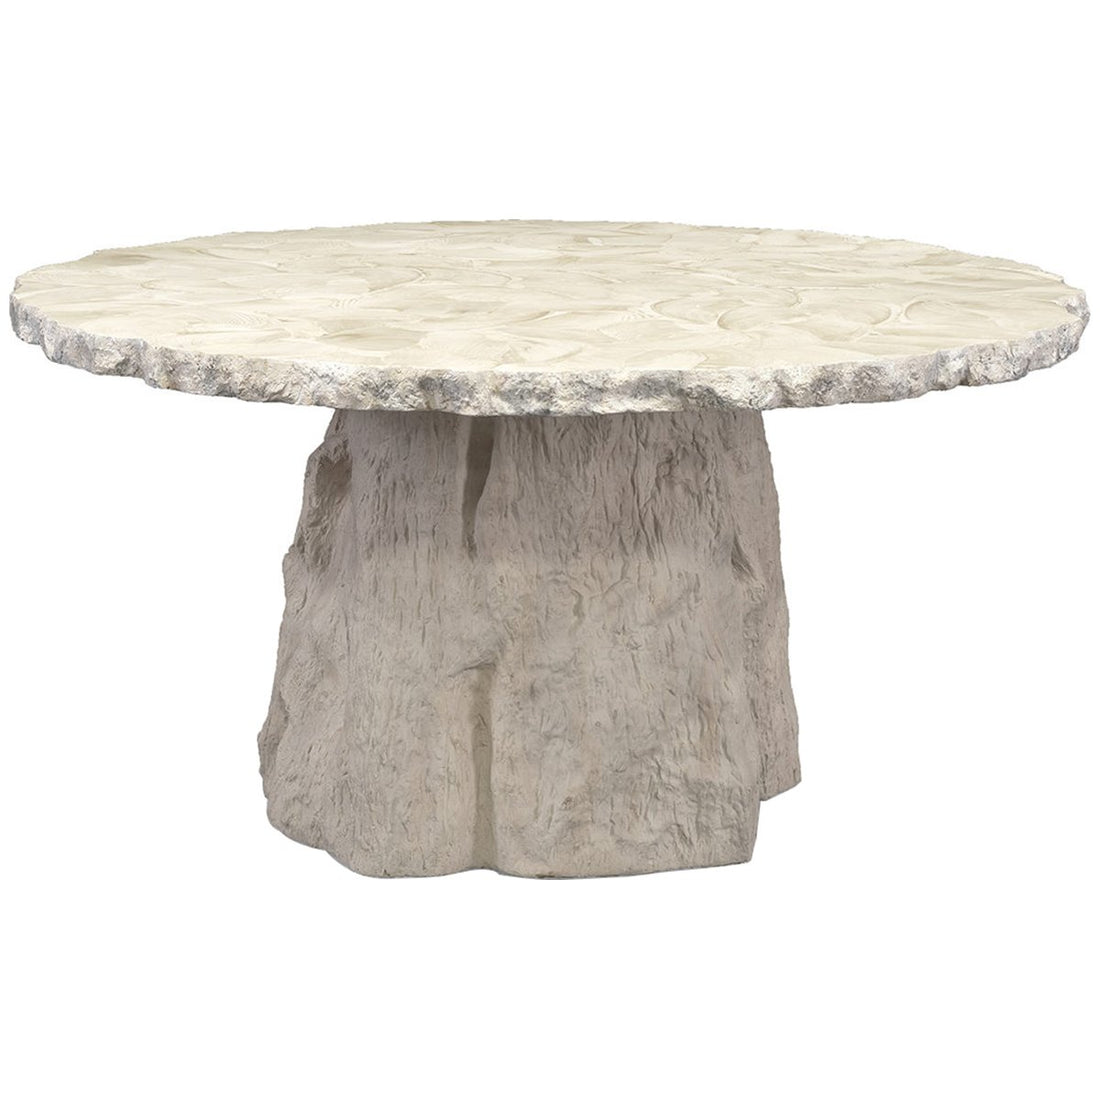 Palecek Camilla Fossilized Clam Dining Table